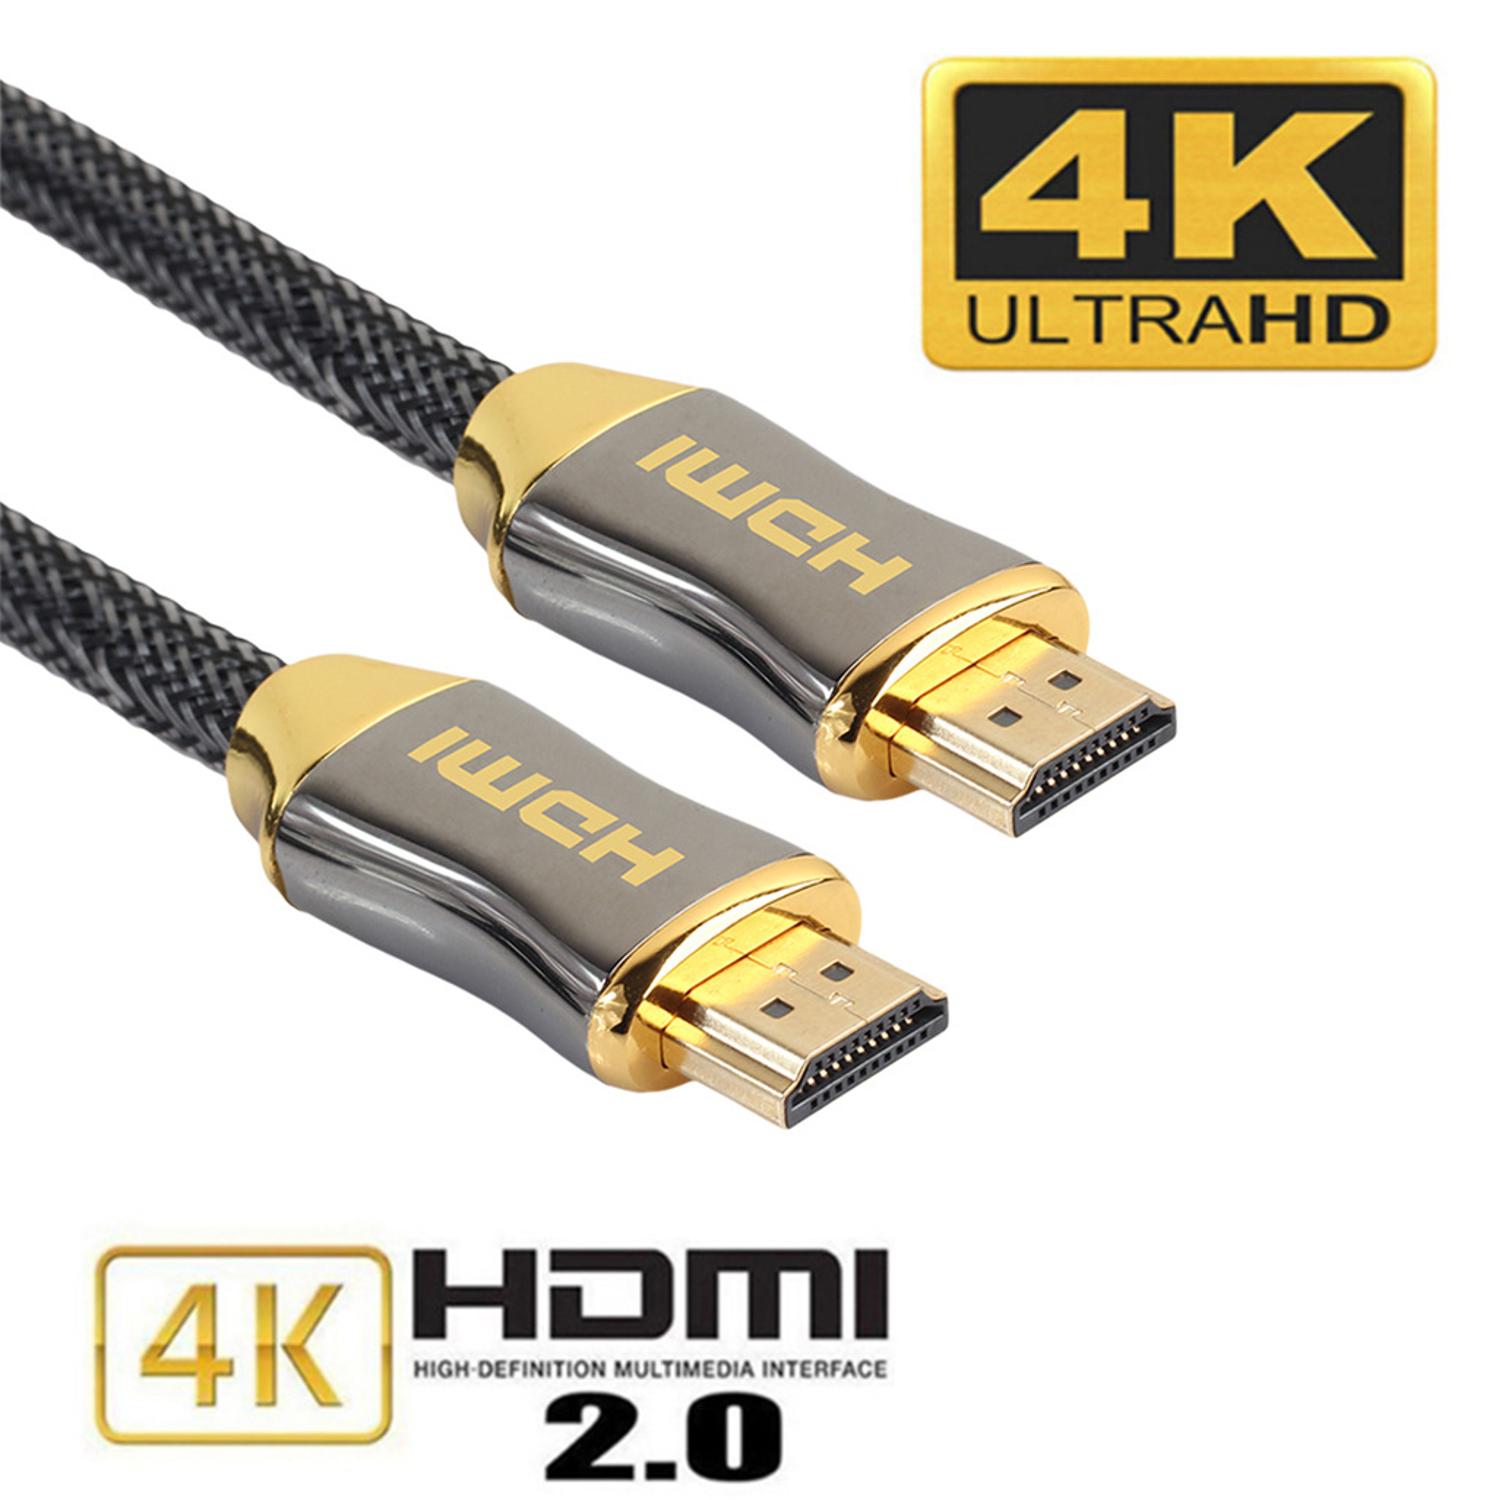 1M 2M 3M 5M 10M 15M 4K 60Hz HDMI To Cable High Speed 2.0 Golden Plated Connection Cable Cord For UHD FHD 3D Xbox PS3 PS4 TV - Price history &